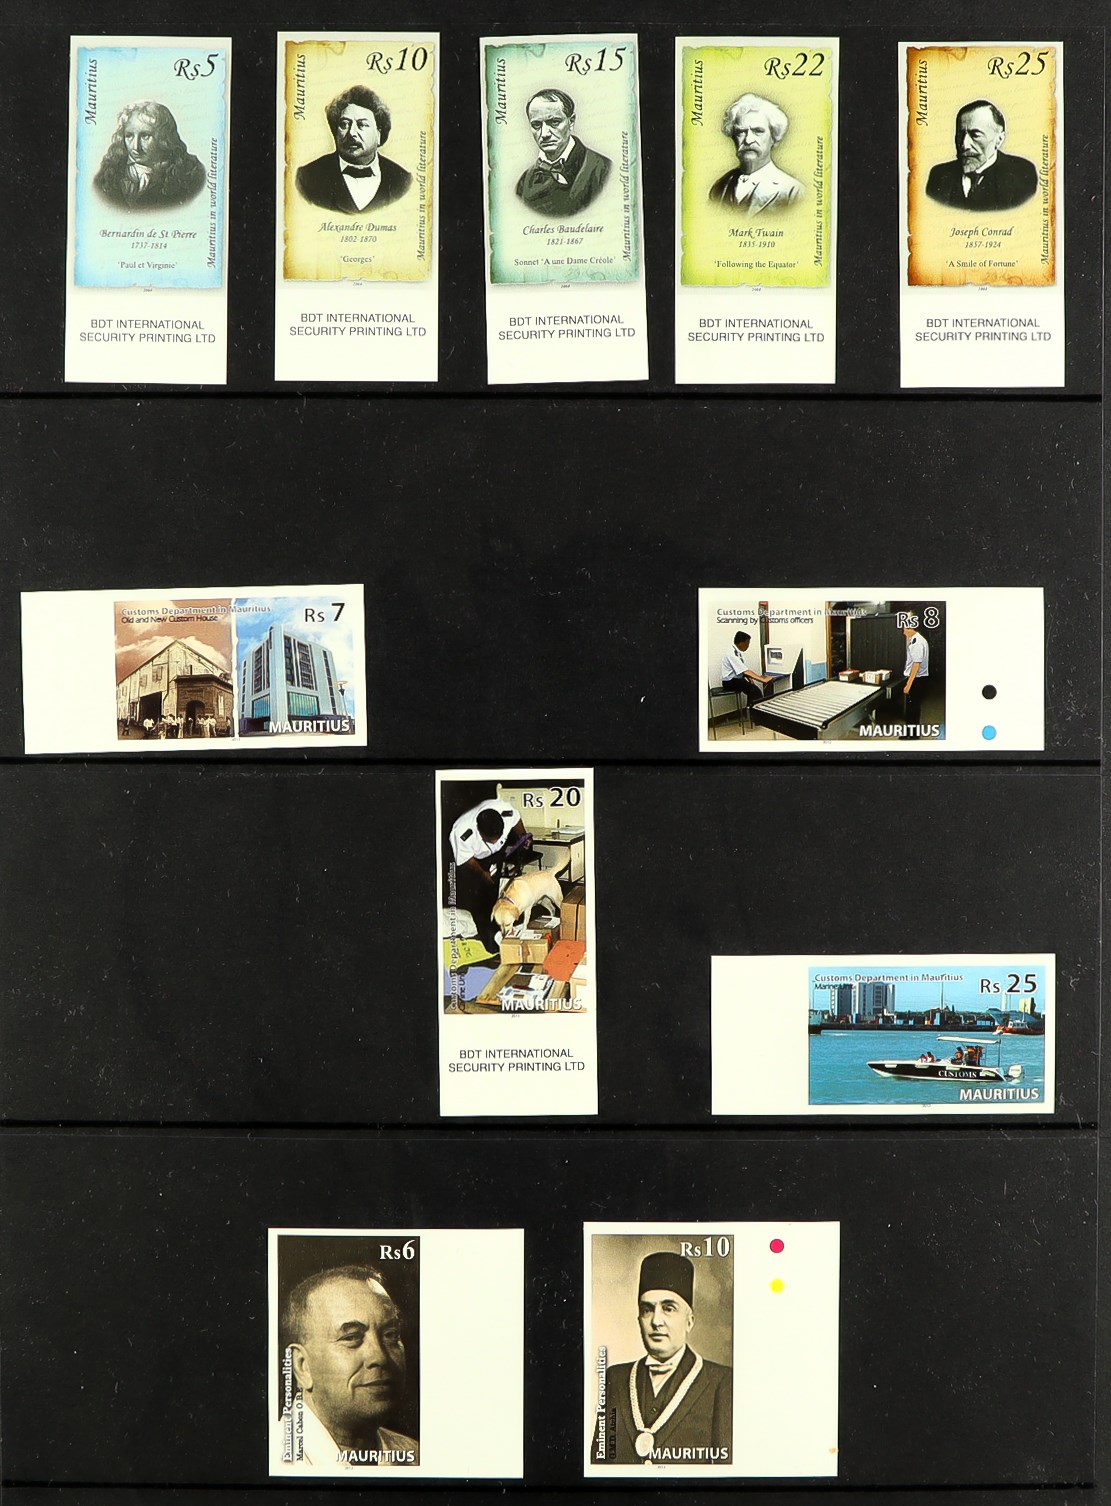 MAURITIUS 2005 - 2013 IMPERFORATE PROOFS of the 2005 Round Island set, 2006 Bicentenary of Mahebourg - Image 2 of 3